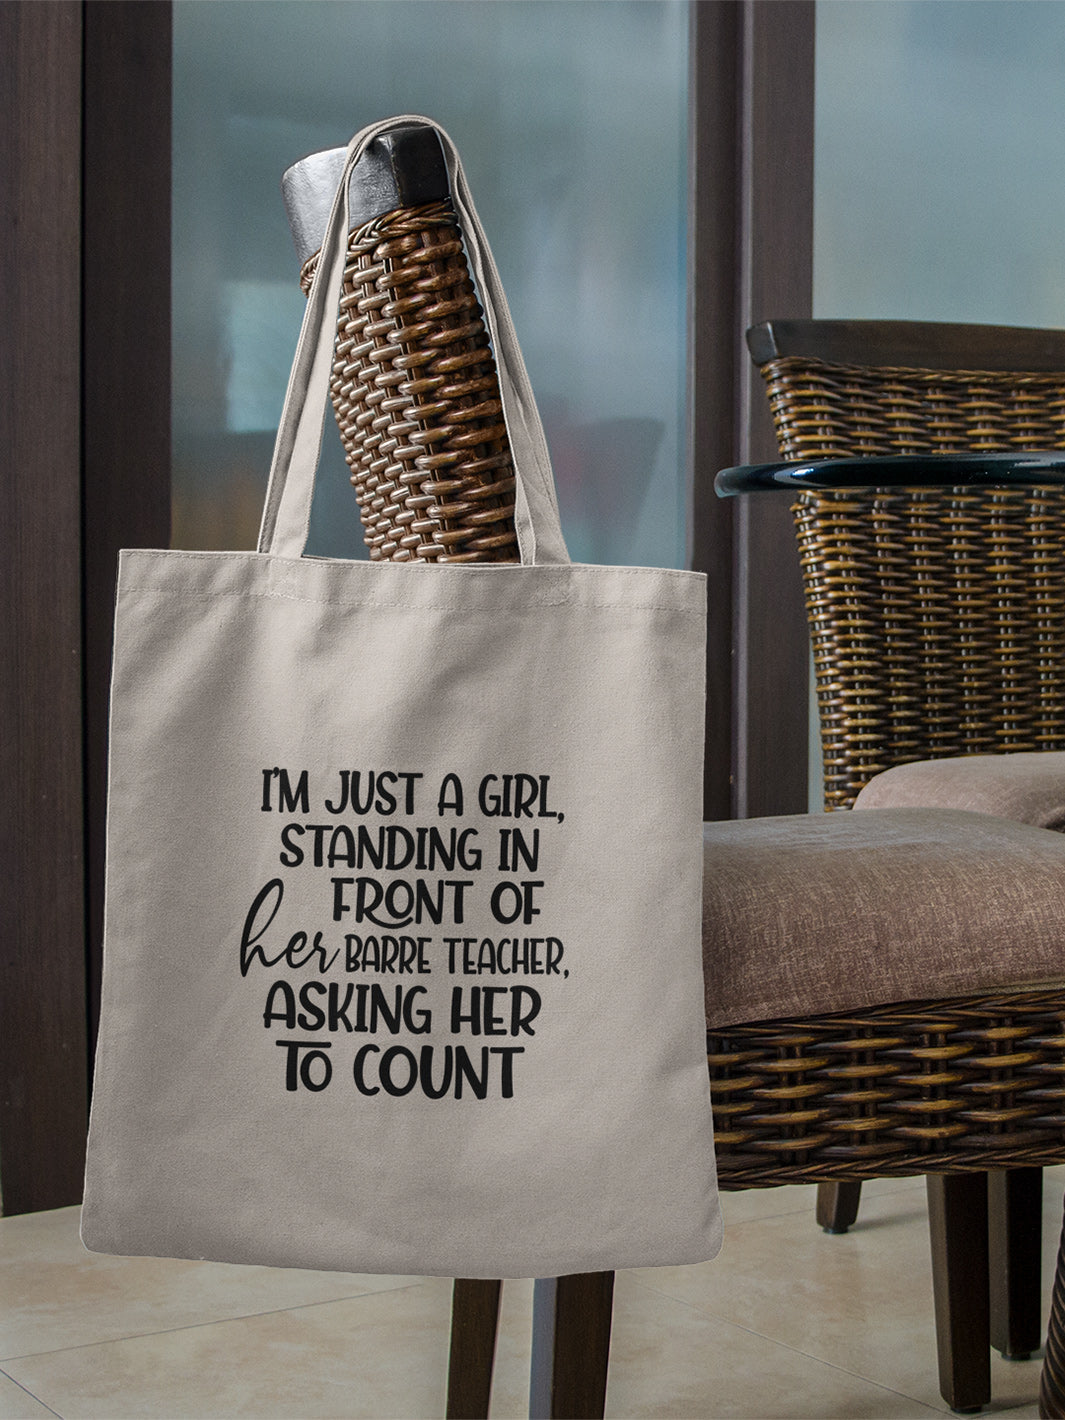 100% cotton canvas tote bag with handles that says "I'm just a girl, standing in front of her Barre Teacher, asking her to count". Bag is hanging off the back a wicker dining room chair. 